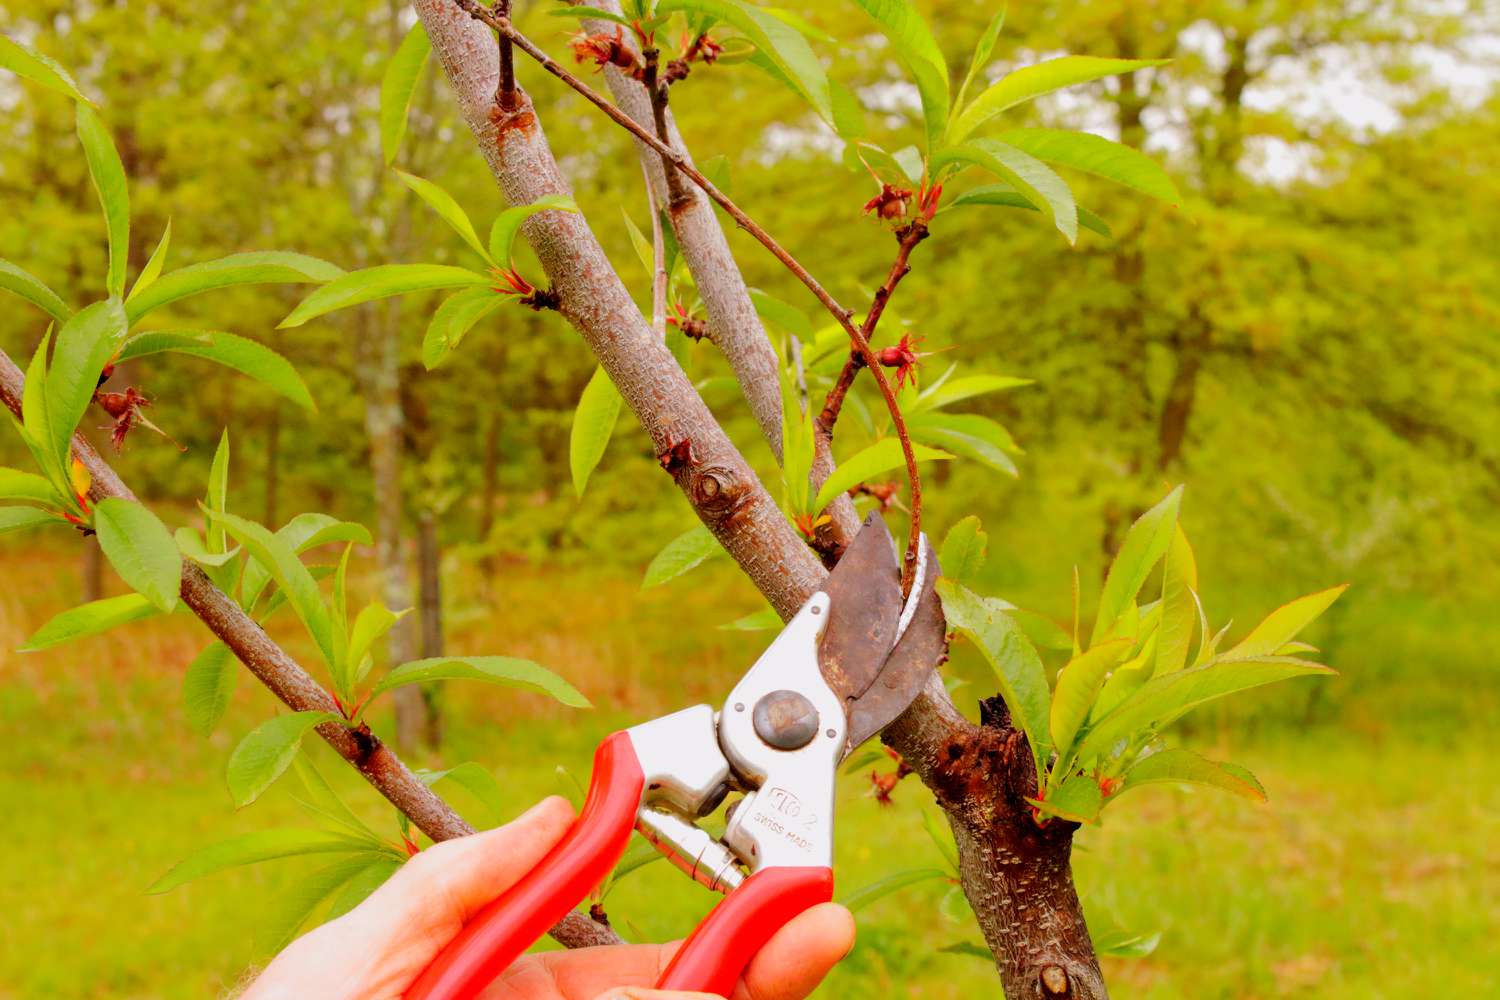 Hand pruners trimming spindly branches off peach tree scaffold branch